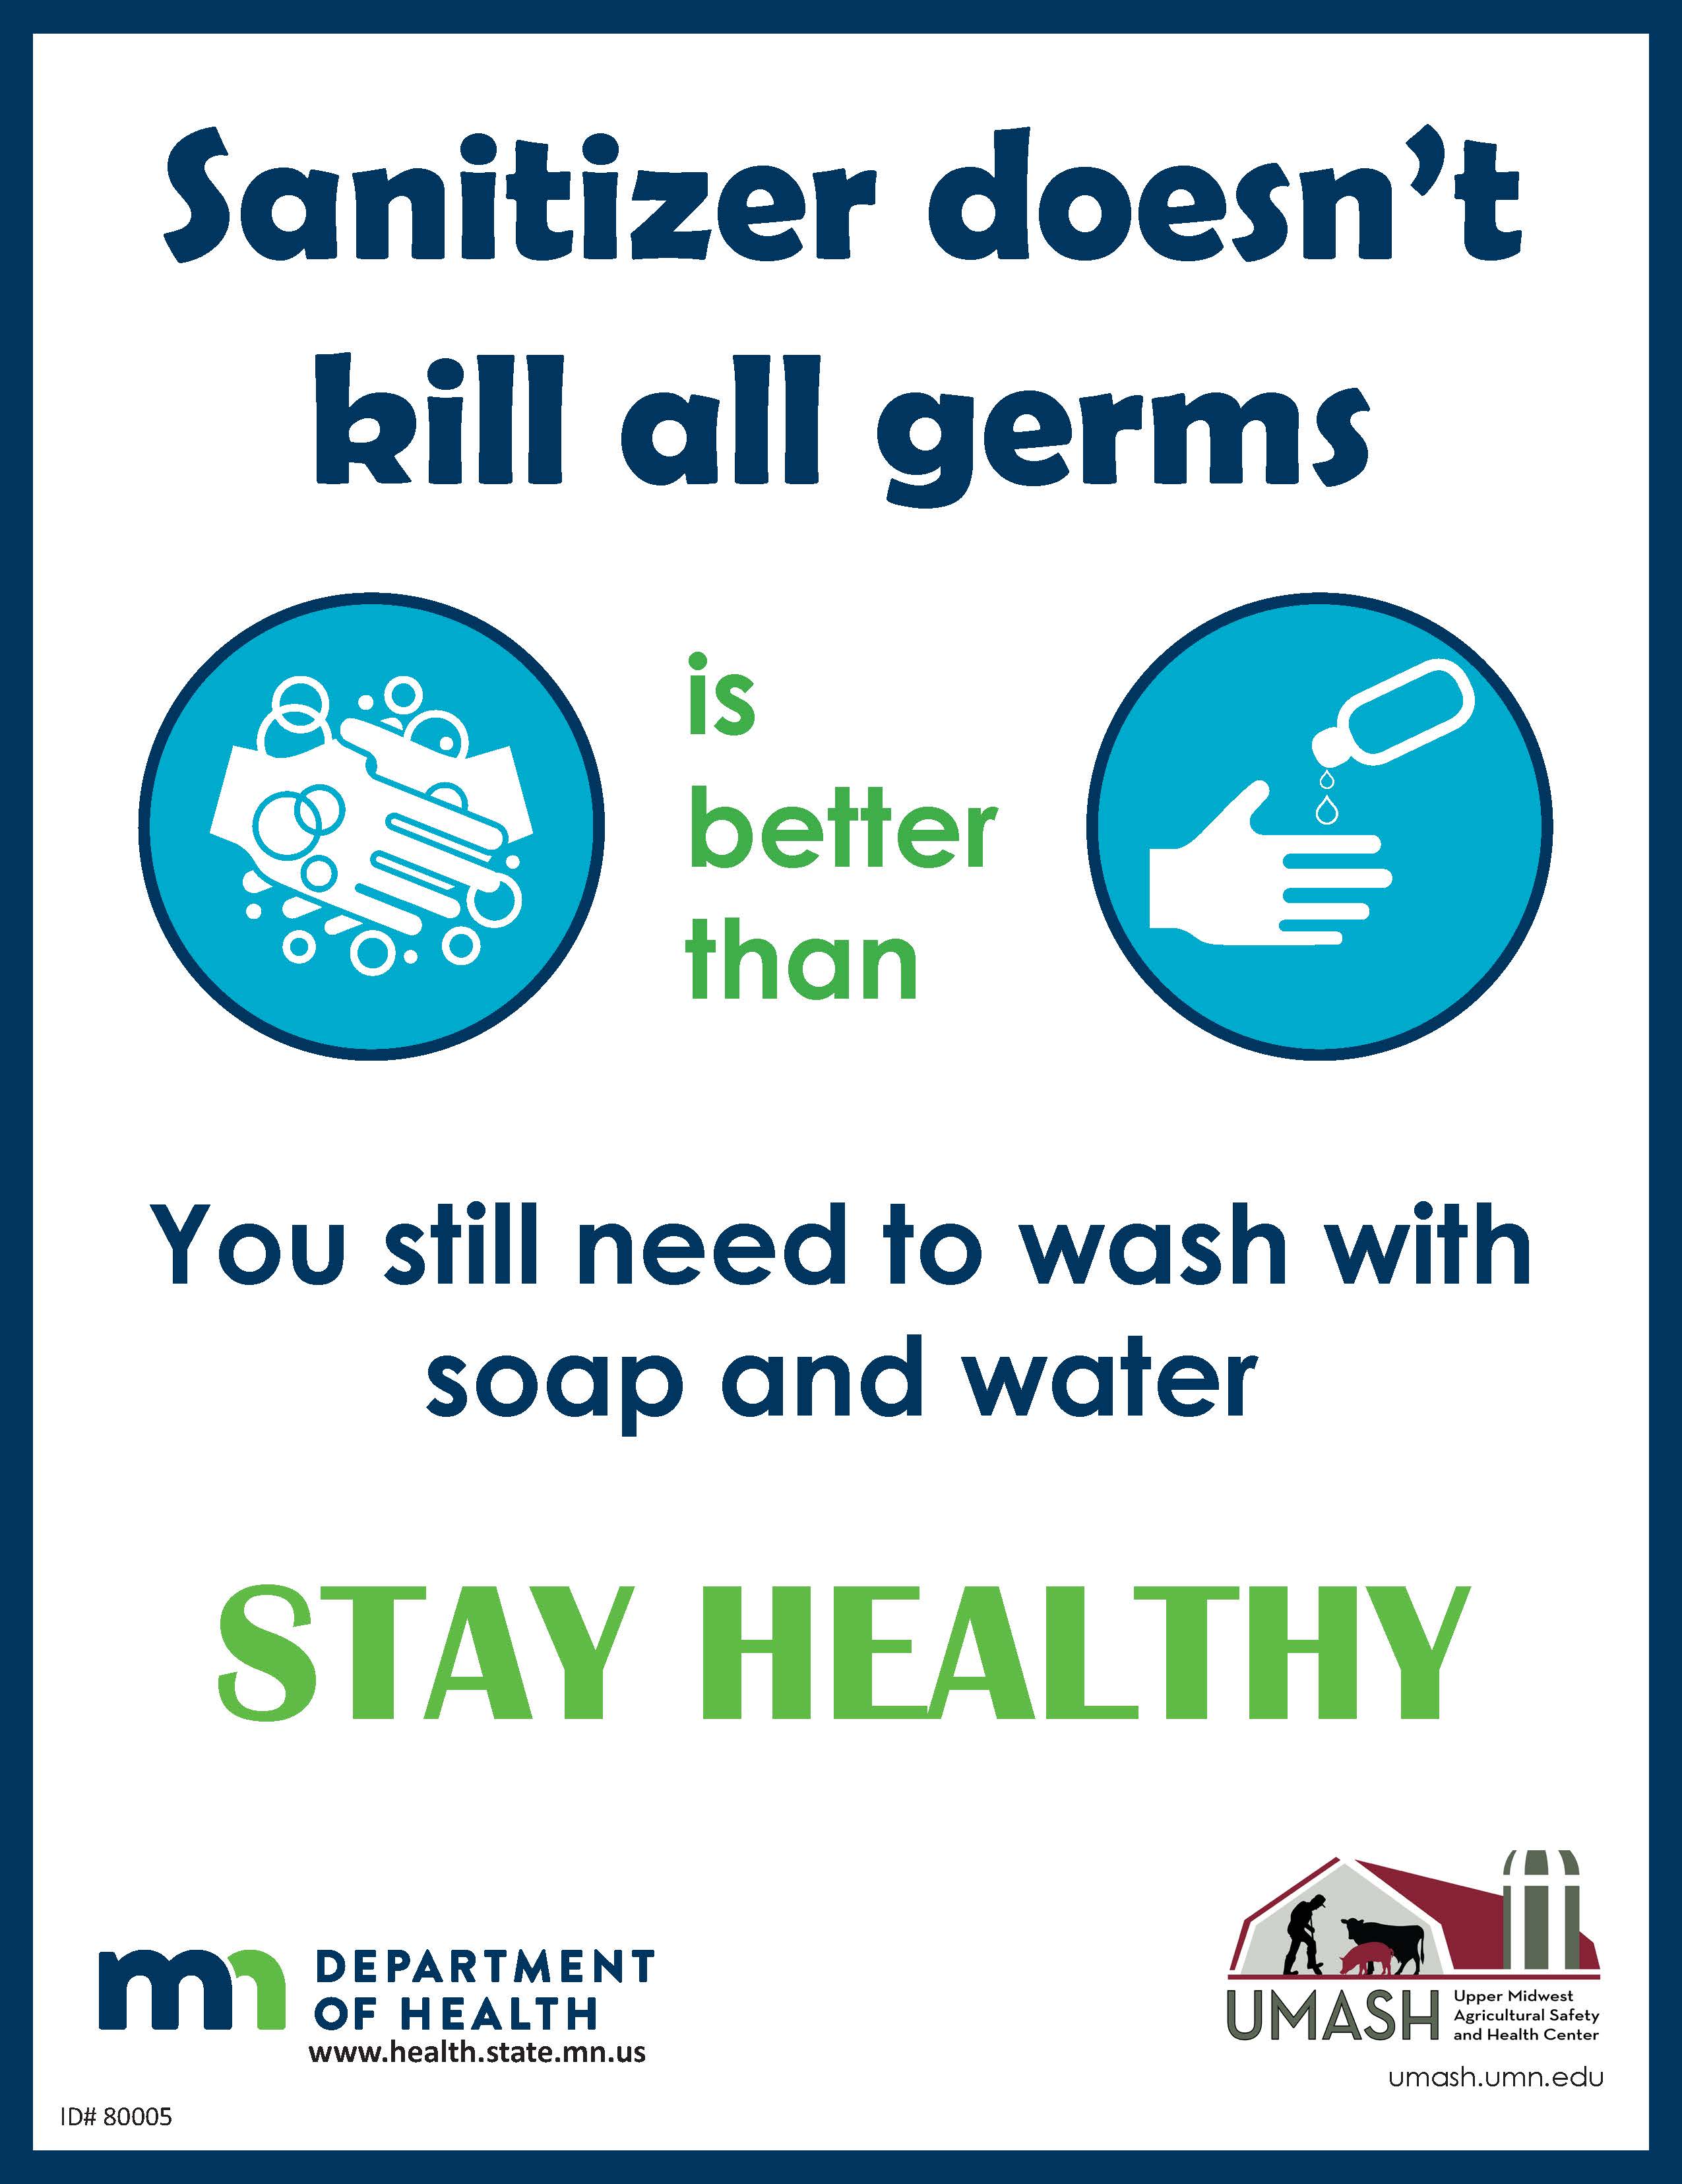 Sanitizer doesn't kill all germs